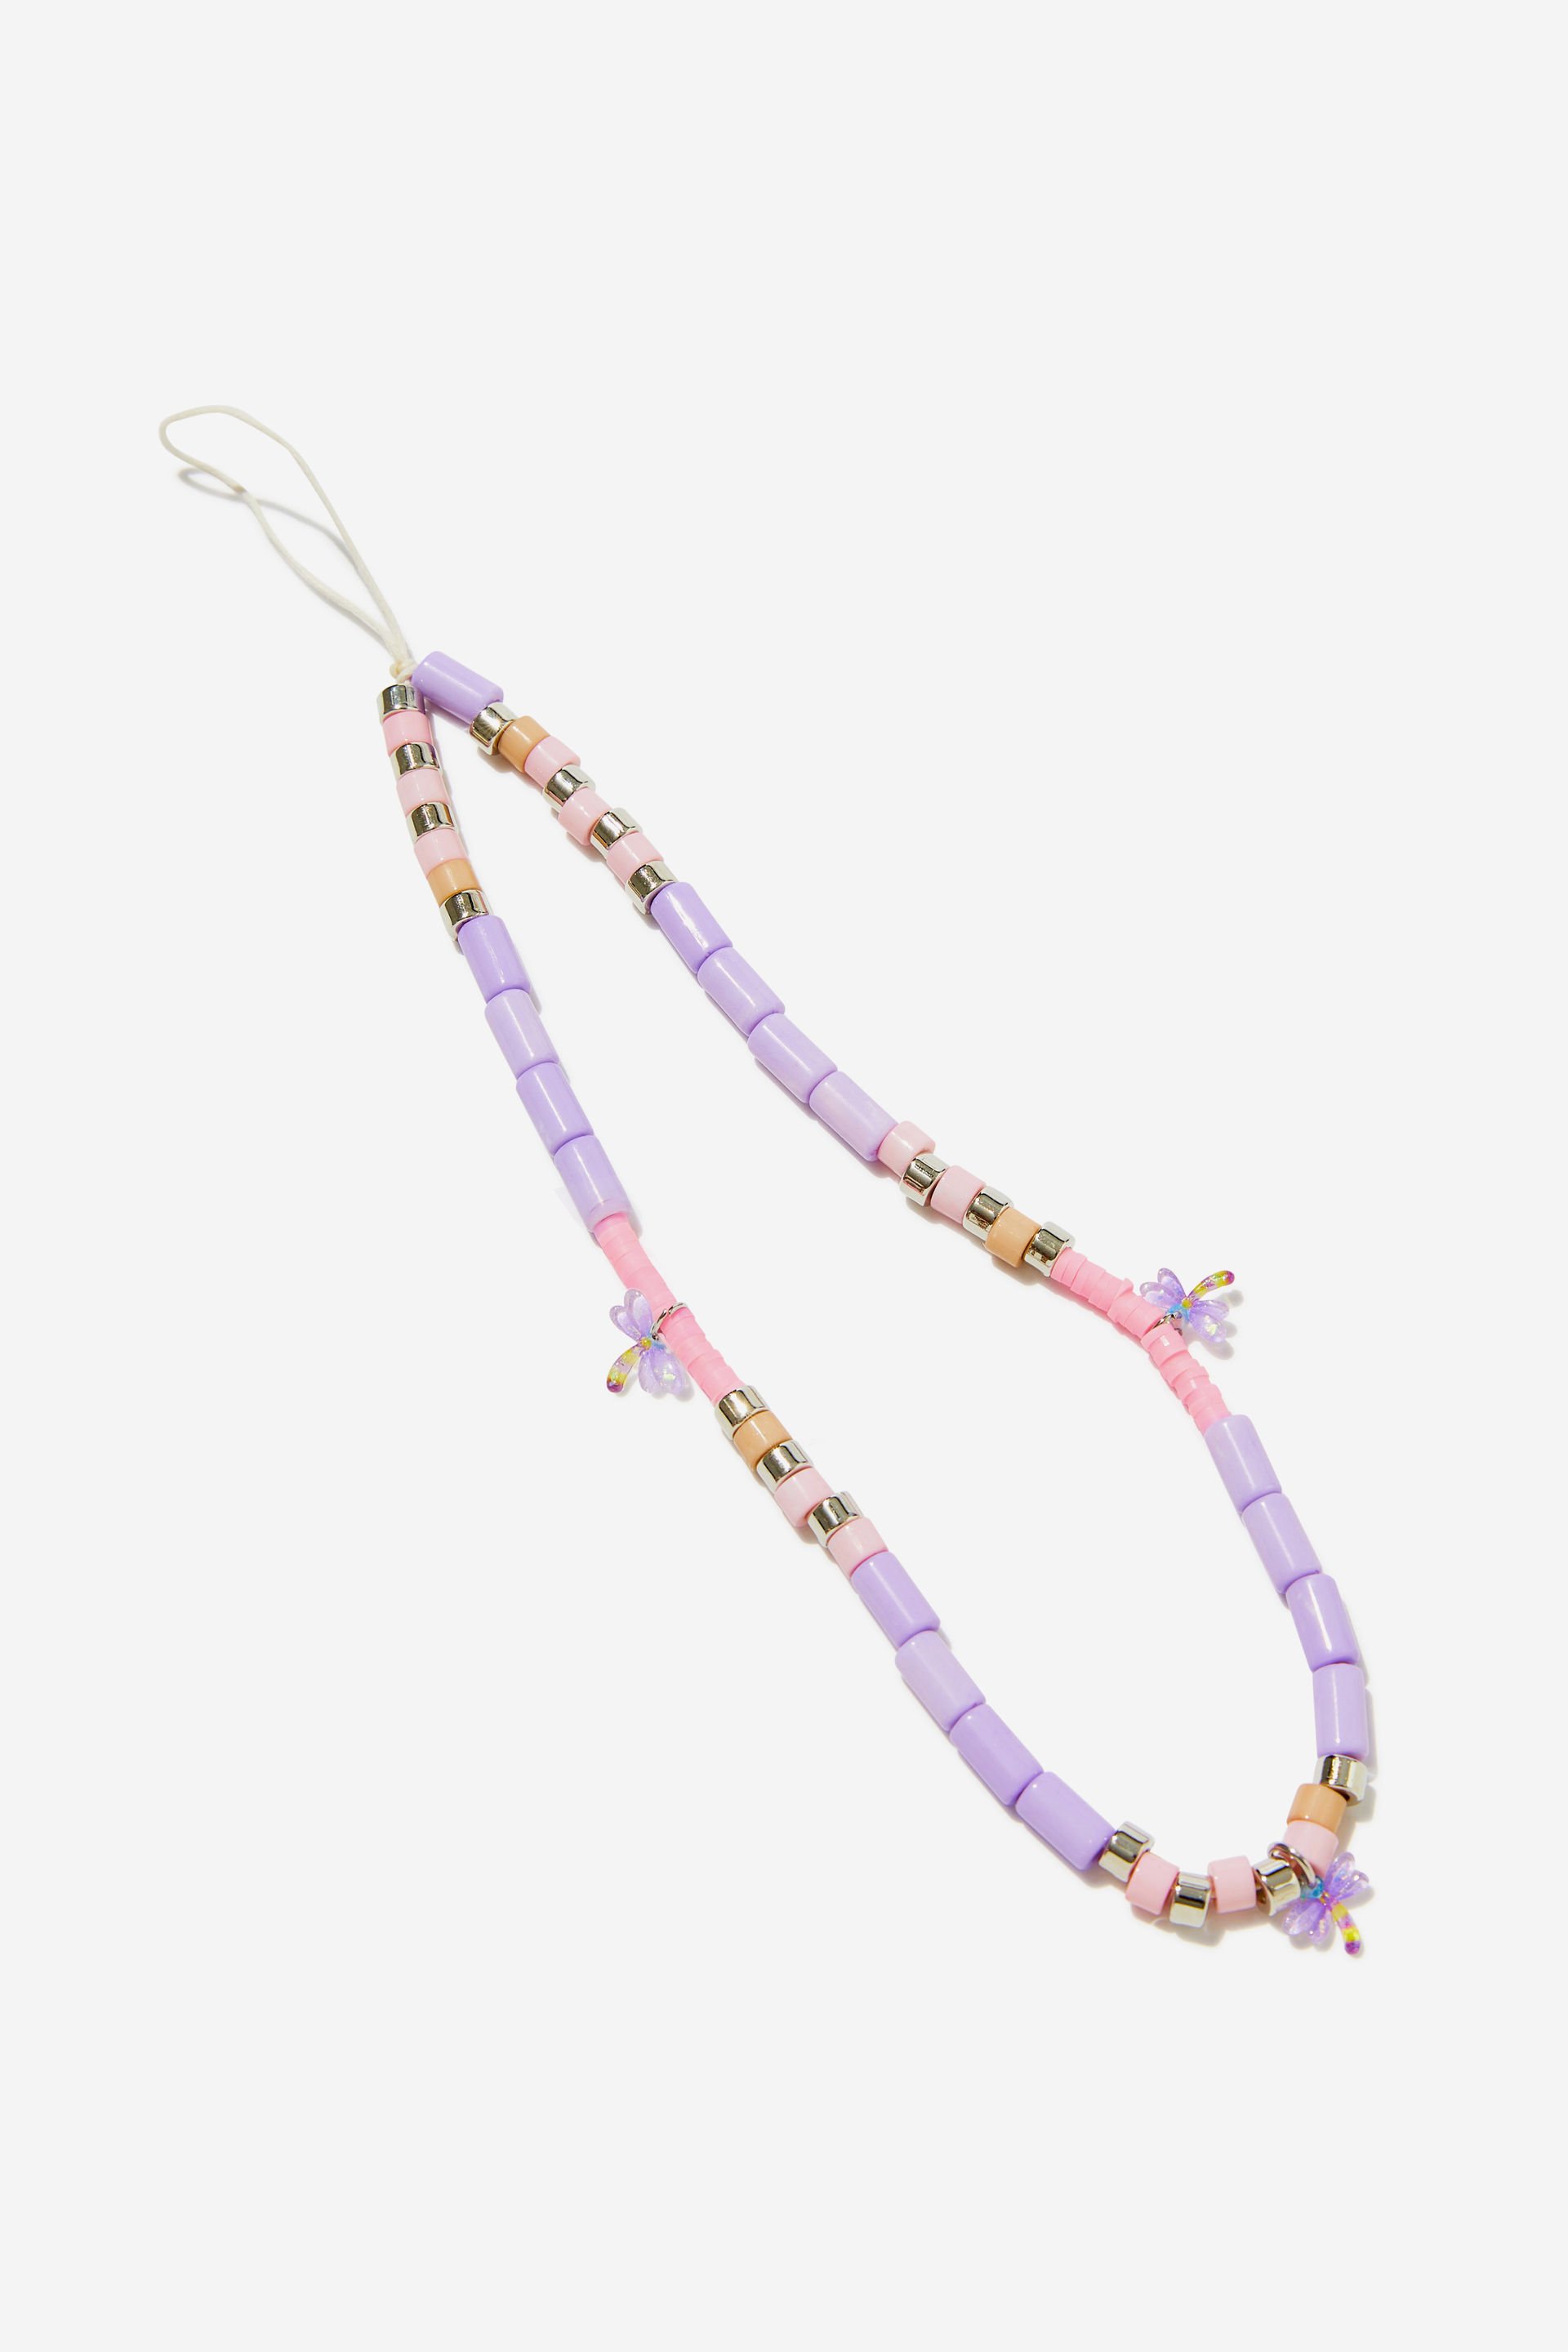 Typo - Carried Away Phone Charm Strap - Pink + purple dragonfly